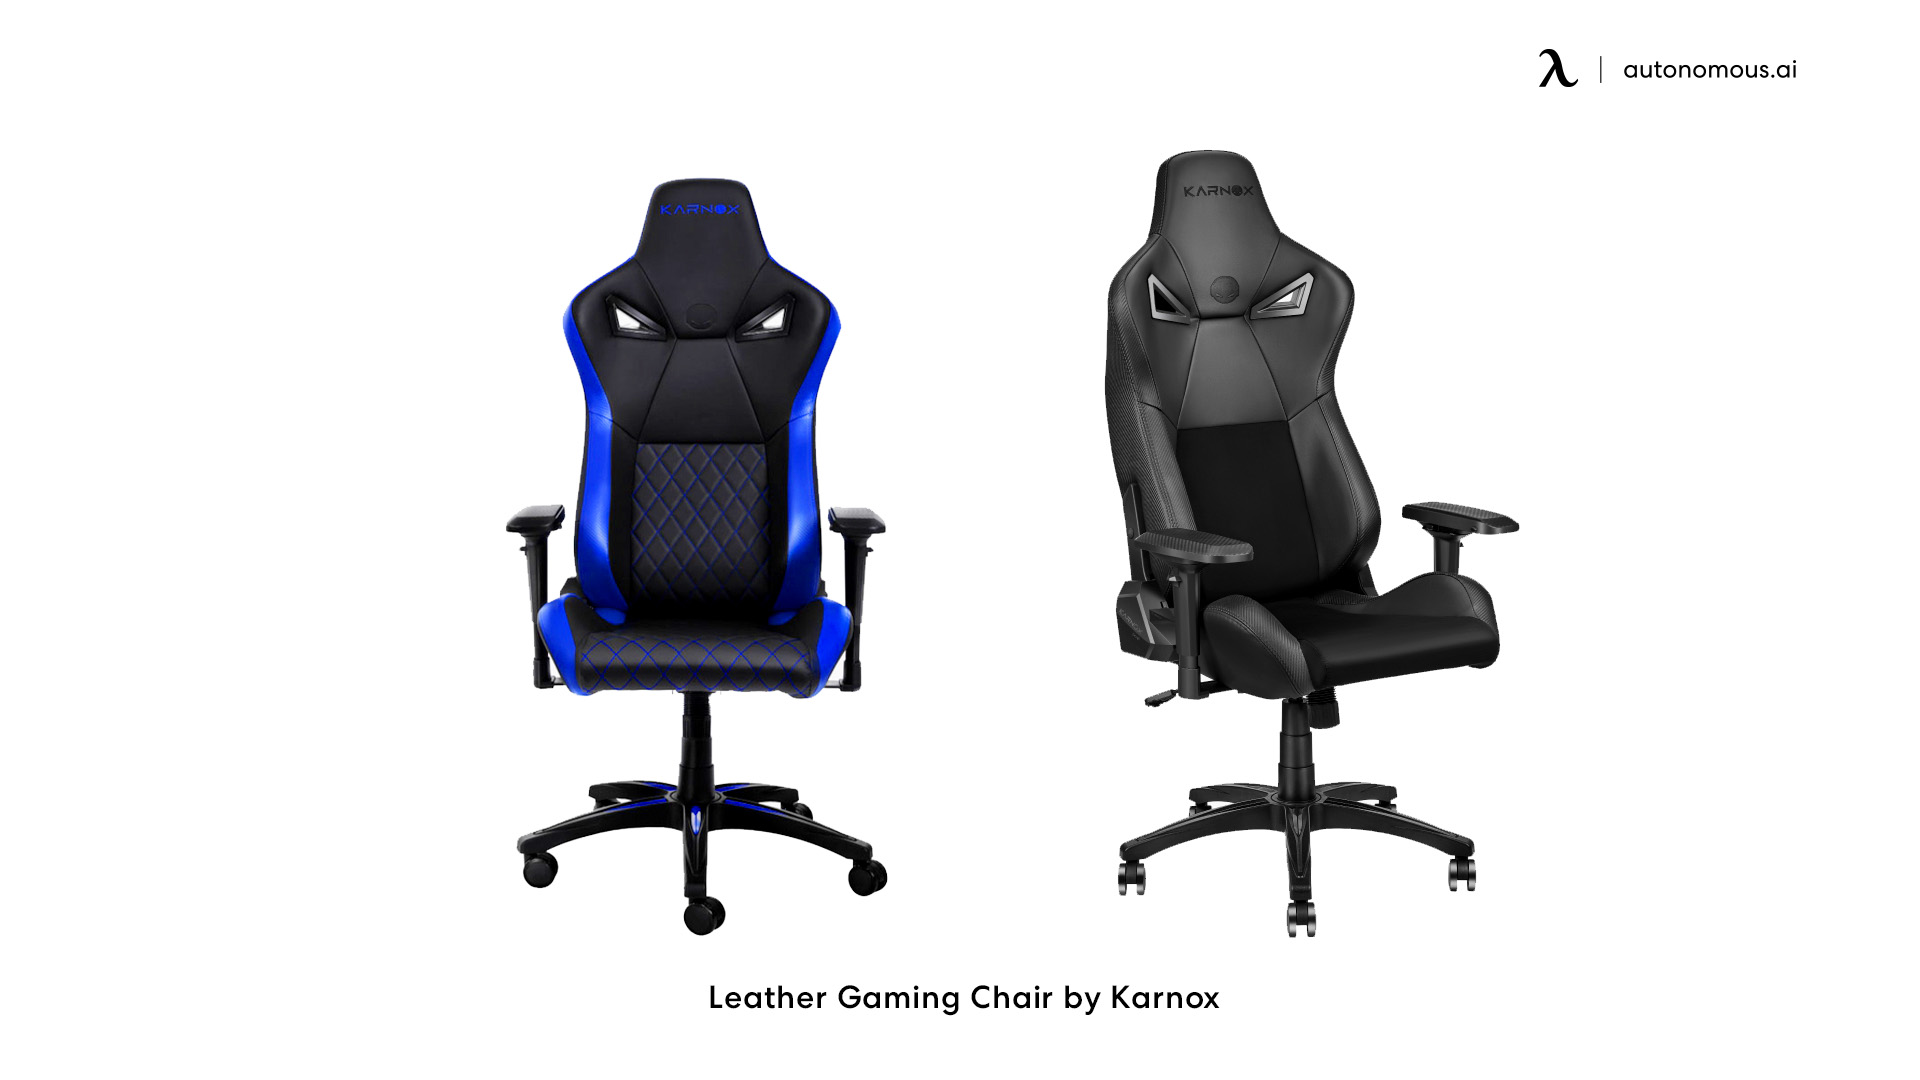 Leather Gaming Chair by Karnox best affordable chairs for gaming